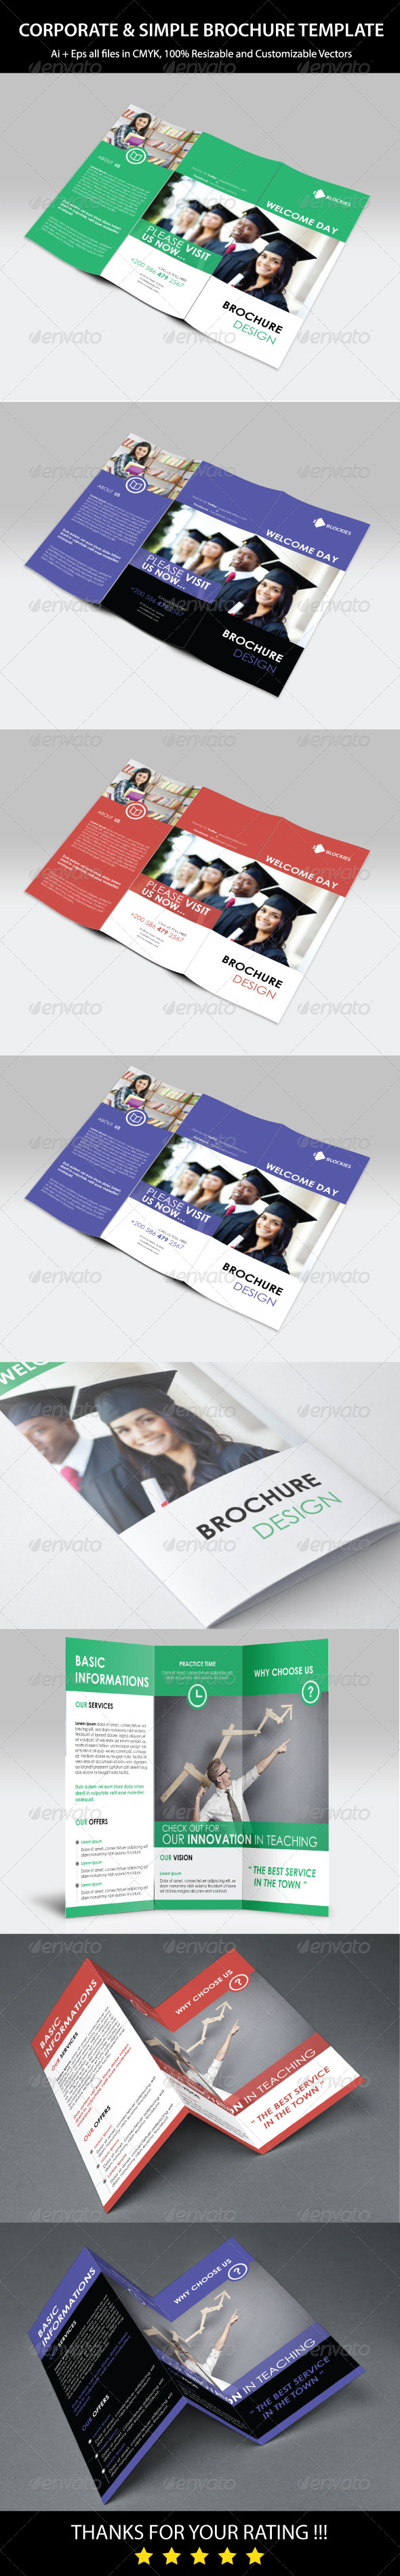 GraphicRiver Simple and Clean Brochure Template 7657643